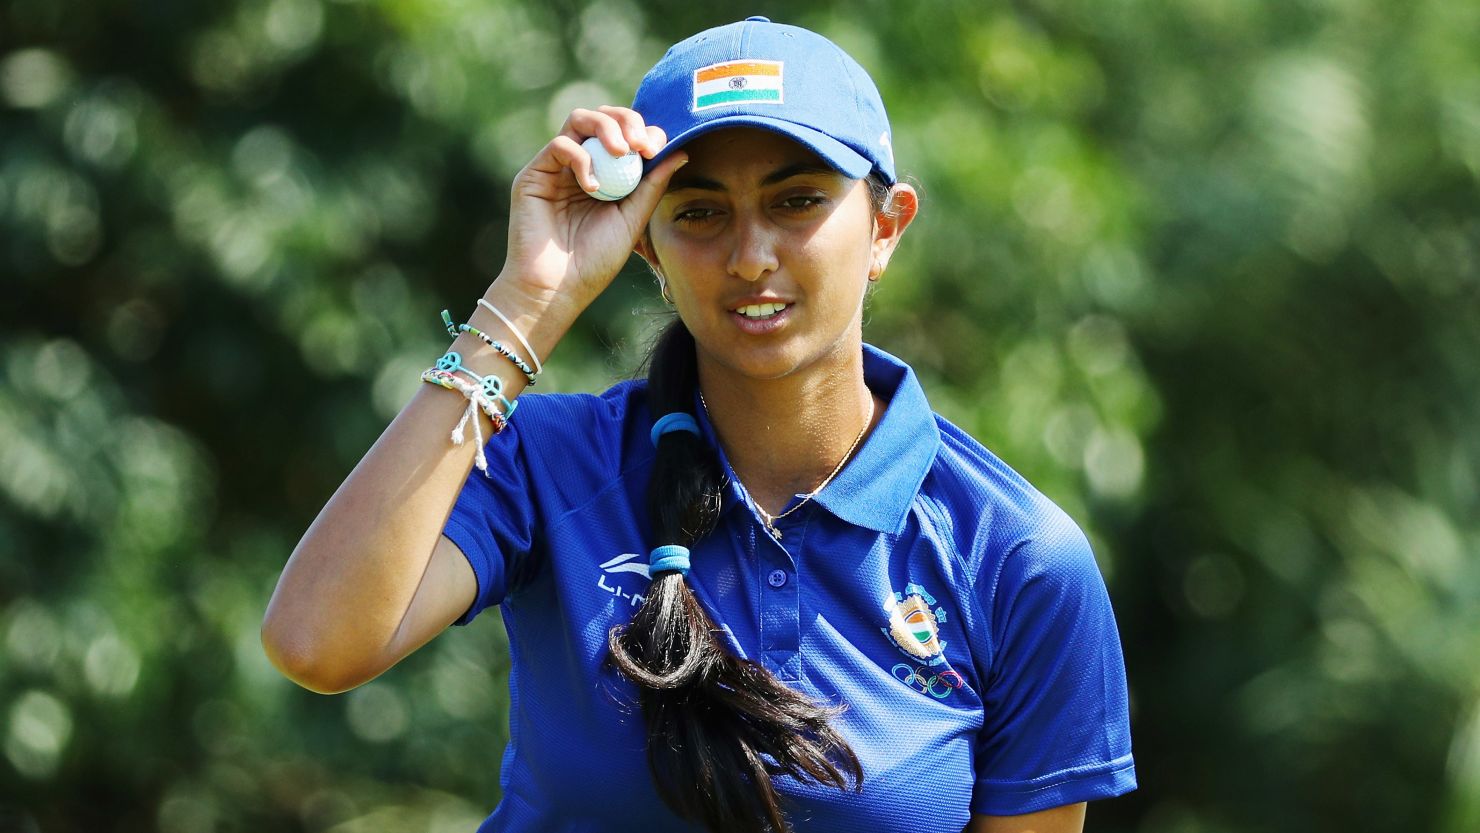 Eighteen-year-old Aditi Ashok has been playing golf since the age of five